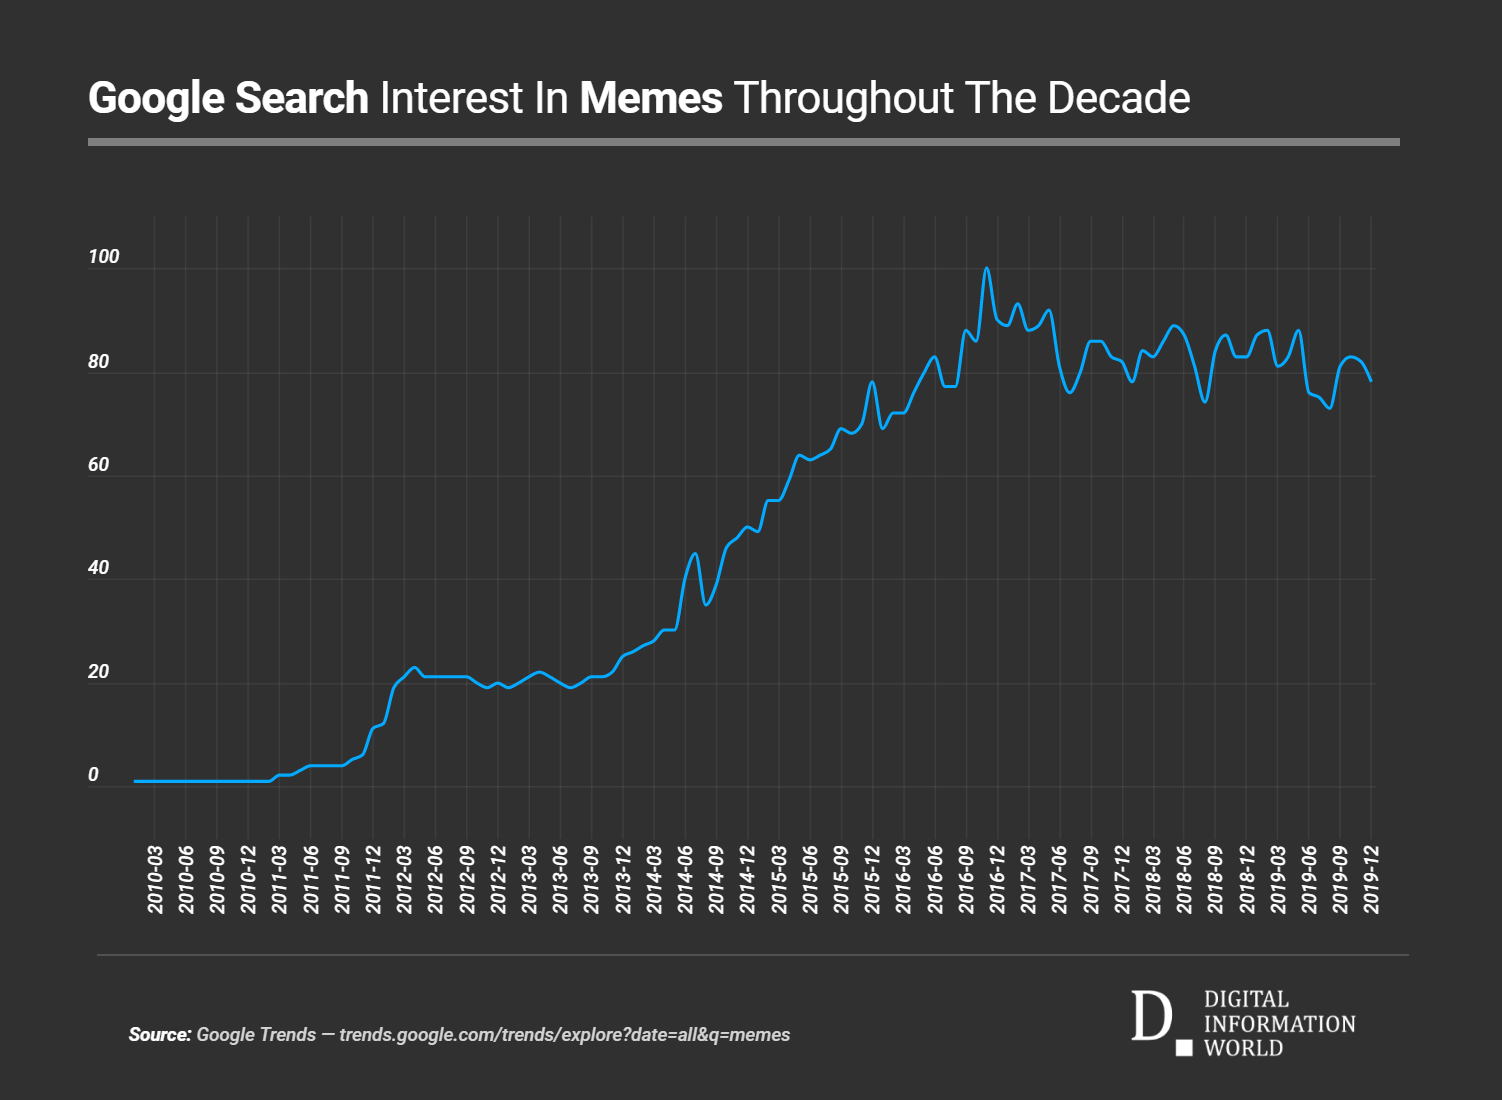 Google Search Interest In Memes Throughout The Decade